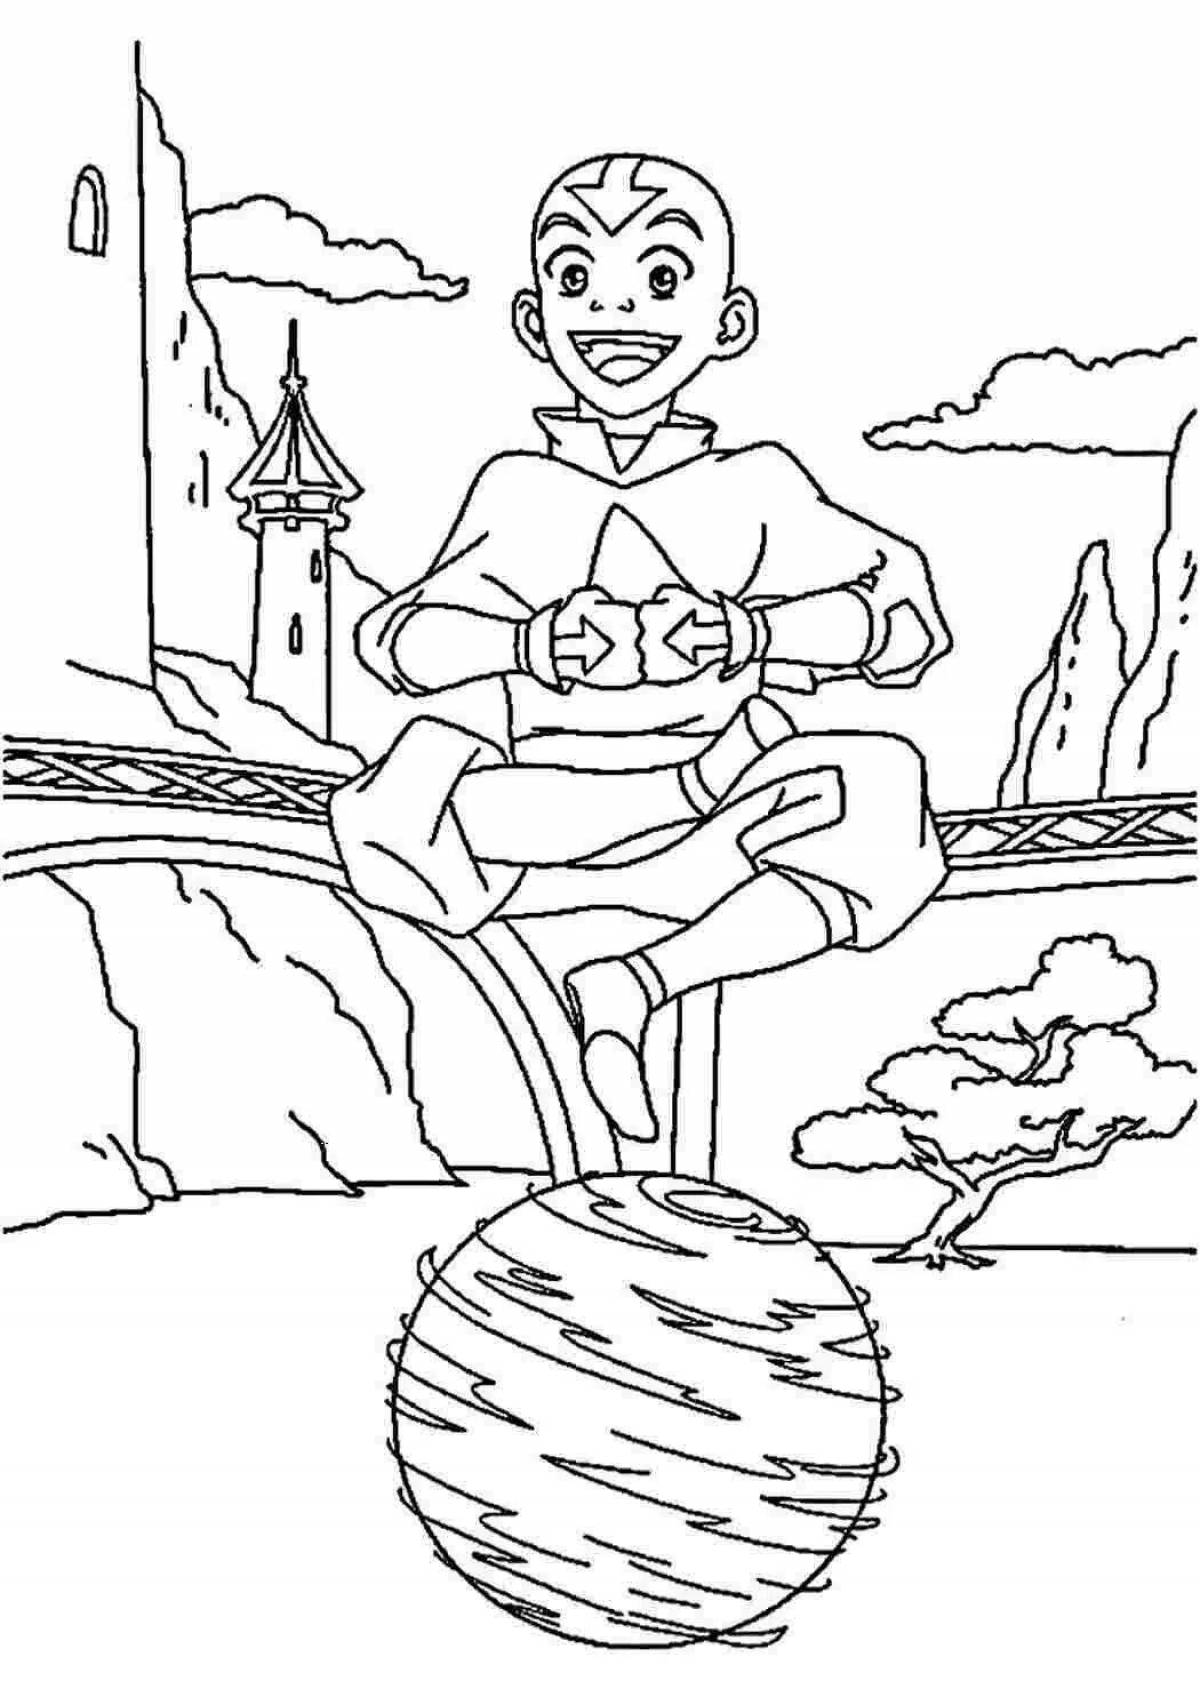 Magic avatar coloring book for kids